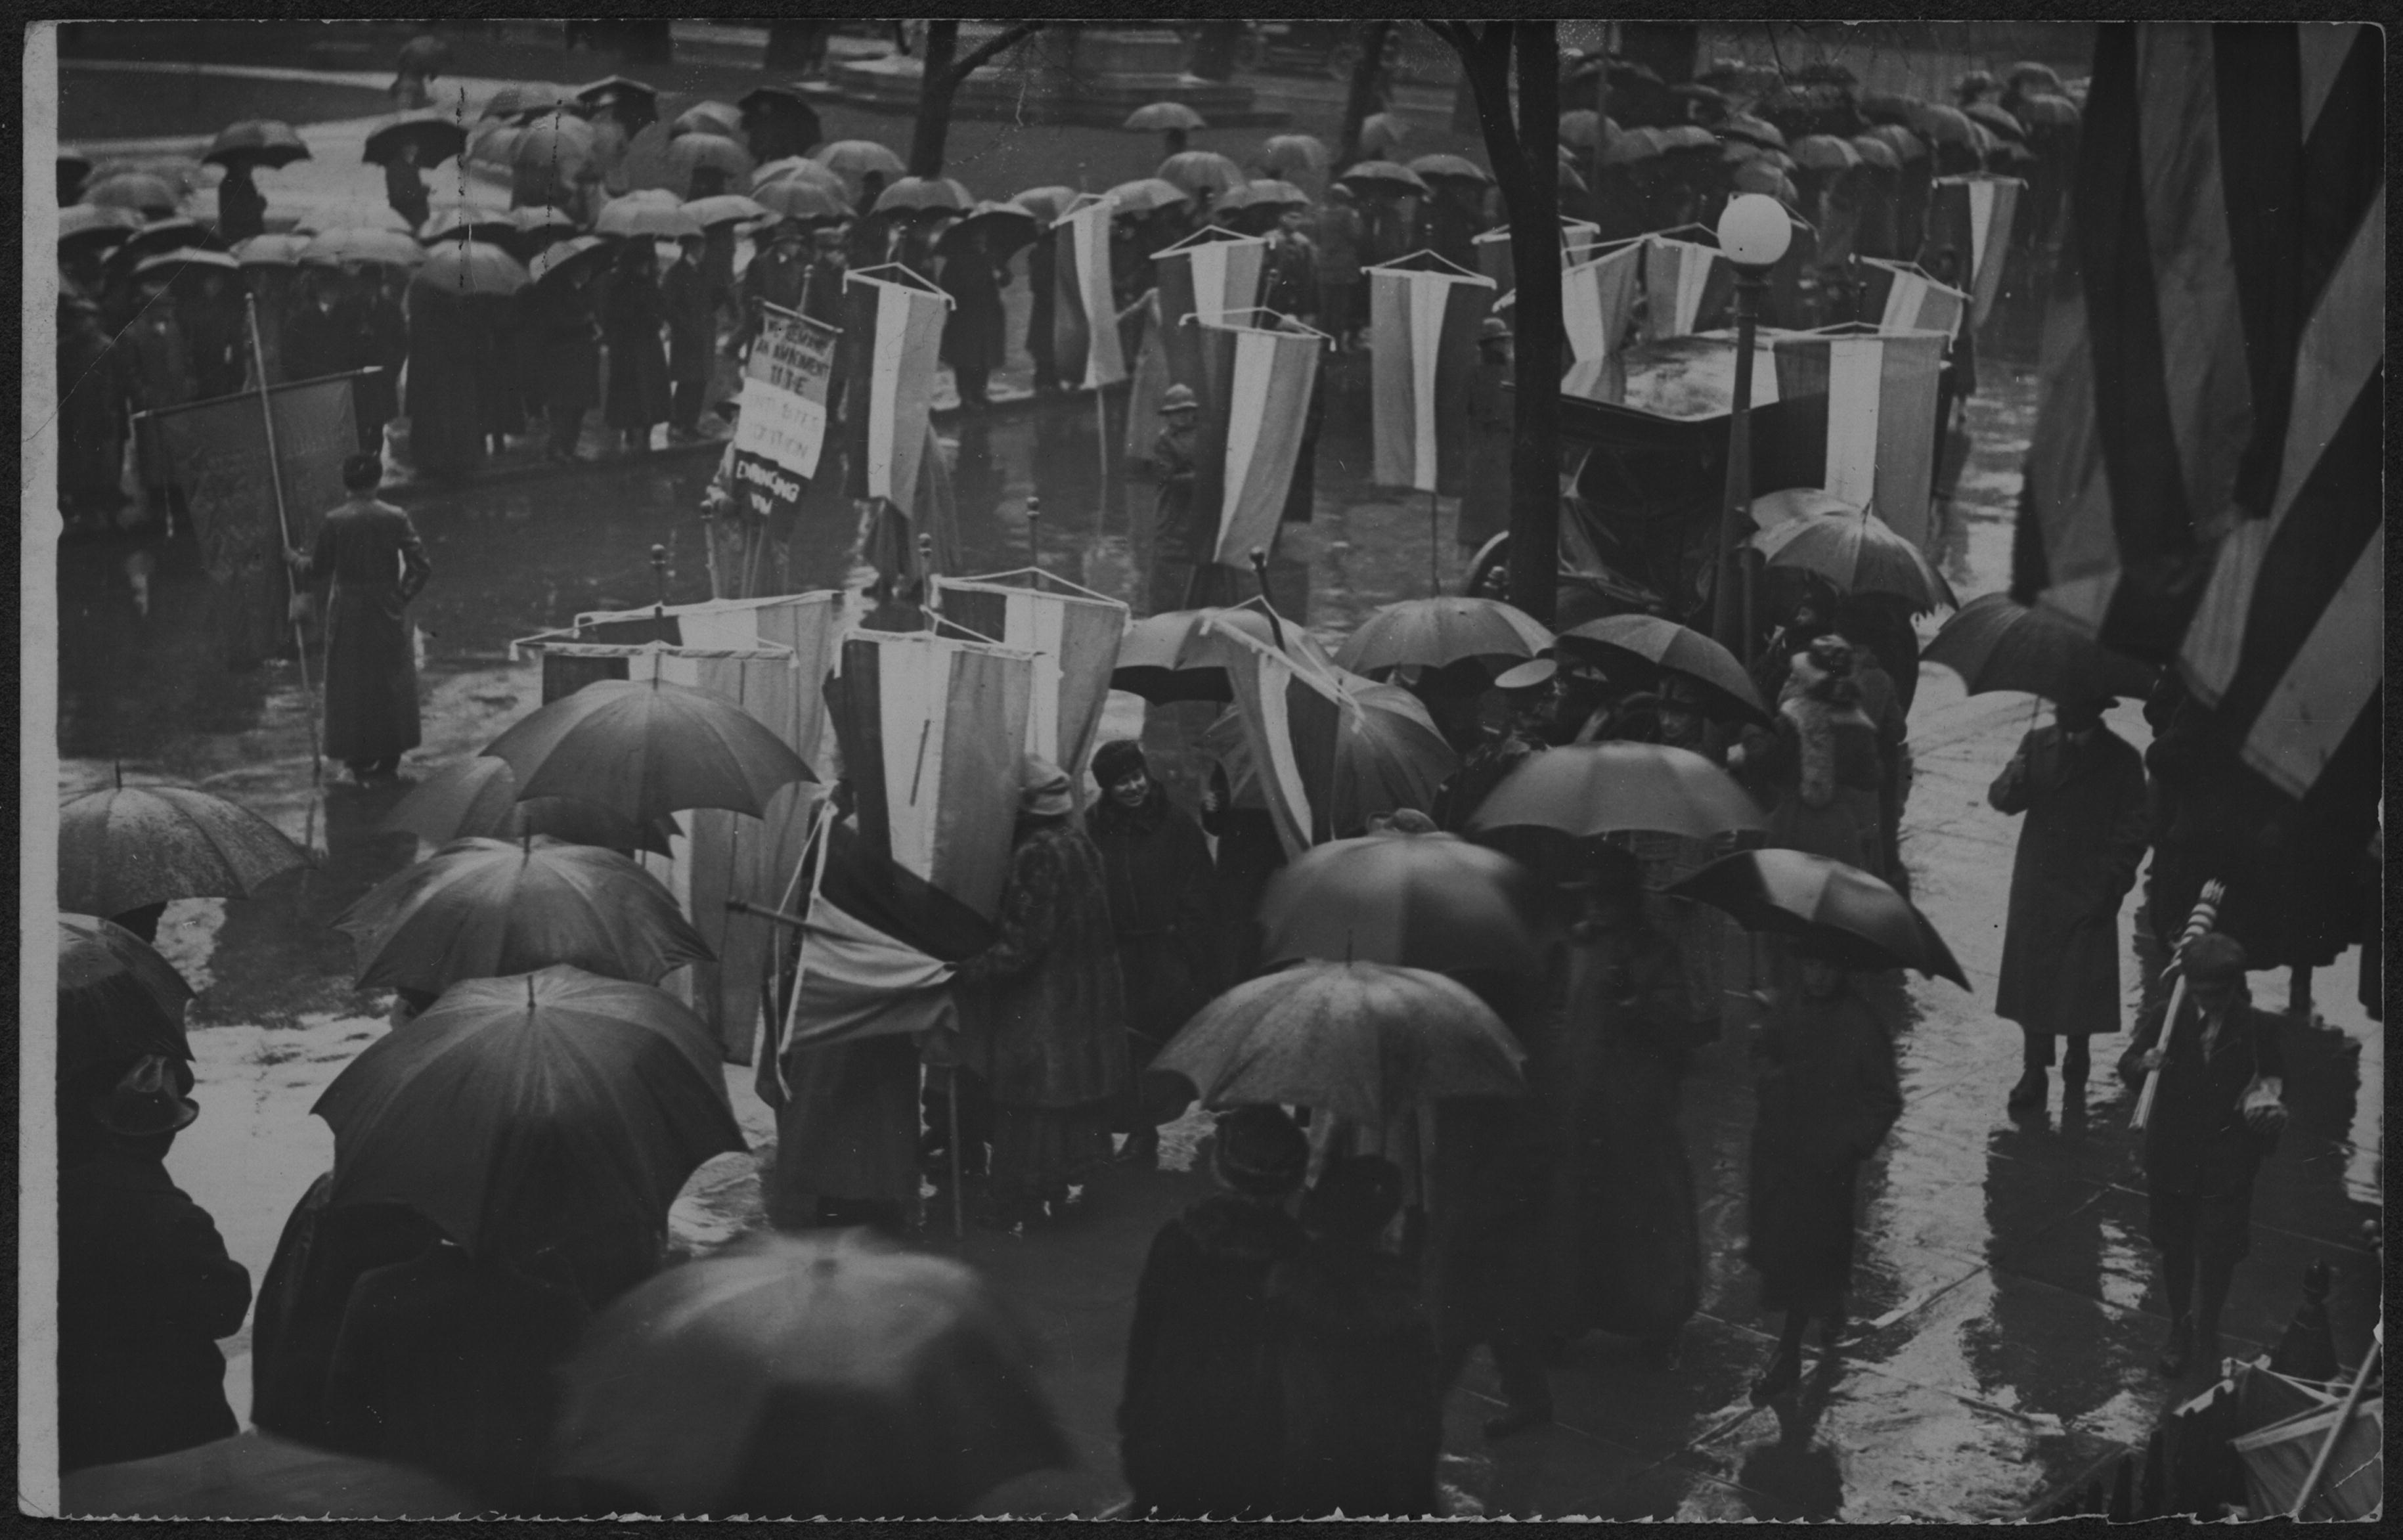 Suffragists picketing with banners in the rain during the Grand Picket, Mar. 4, 1917.